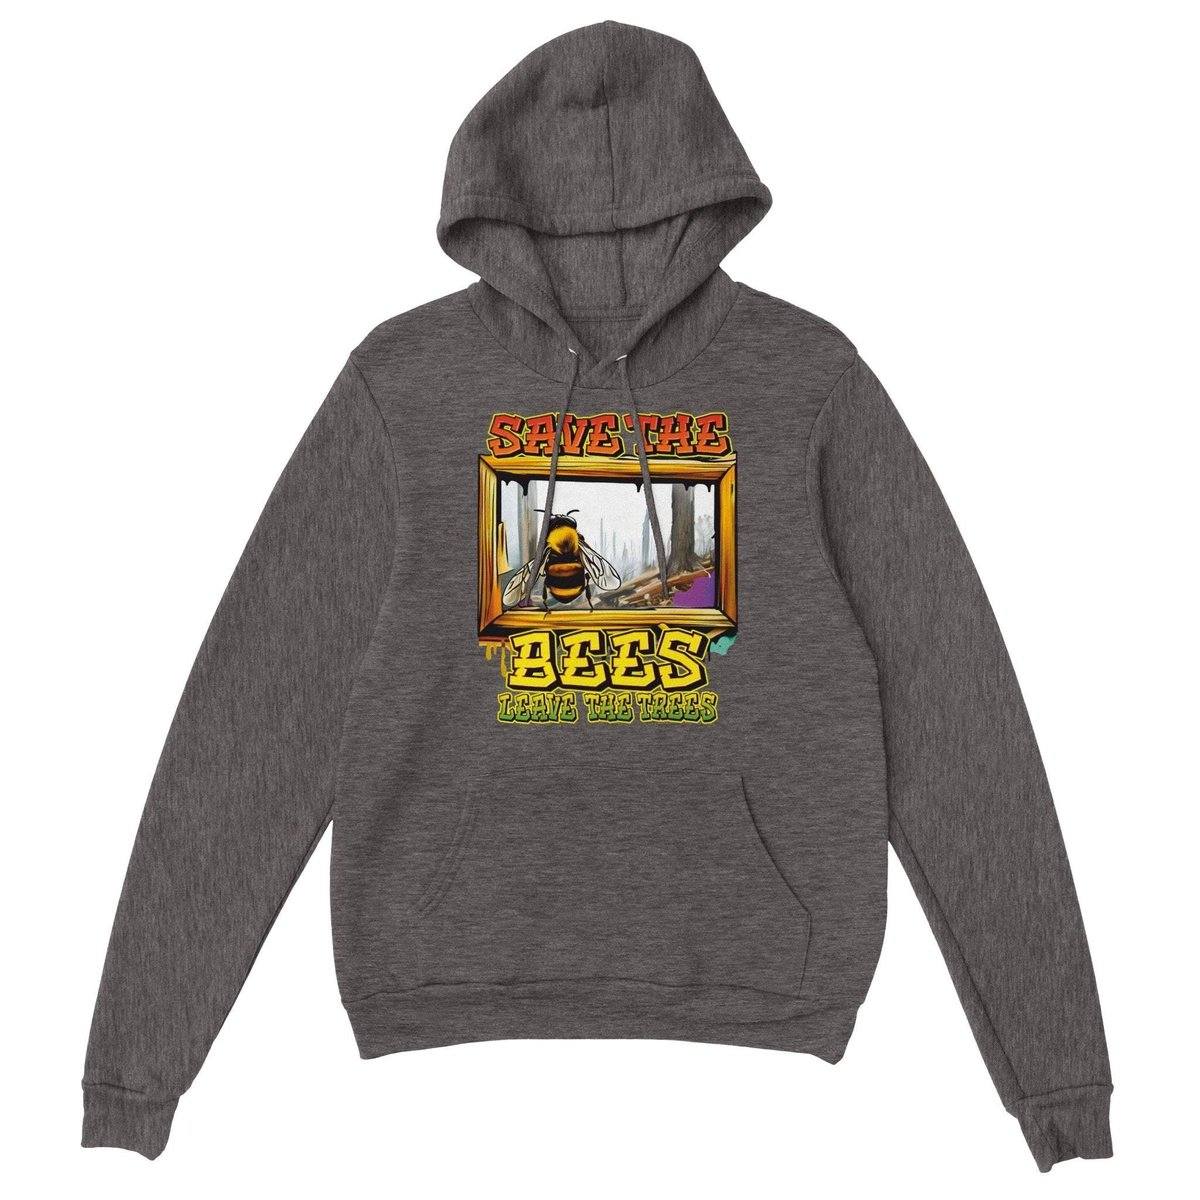 Save The Bees Hoodie - Leave The Trees - Premium Unisex Pullover Hoodie Australia Online Color Charcoal Heather / XS